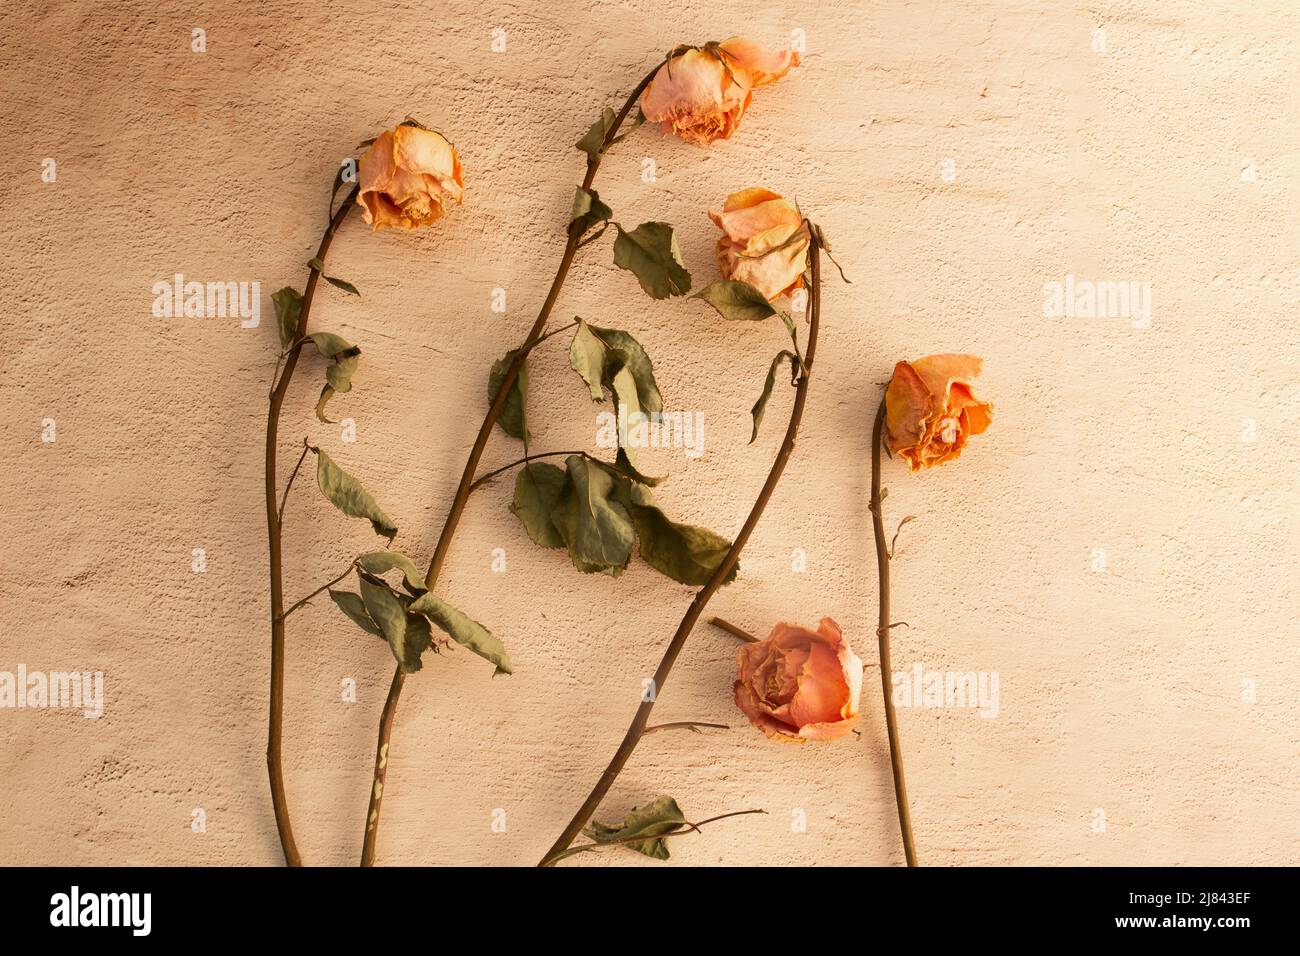 pastel-toned desiccated roses seen from above on a light background Stock Photo